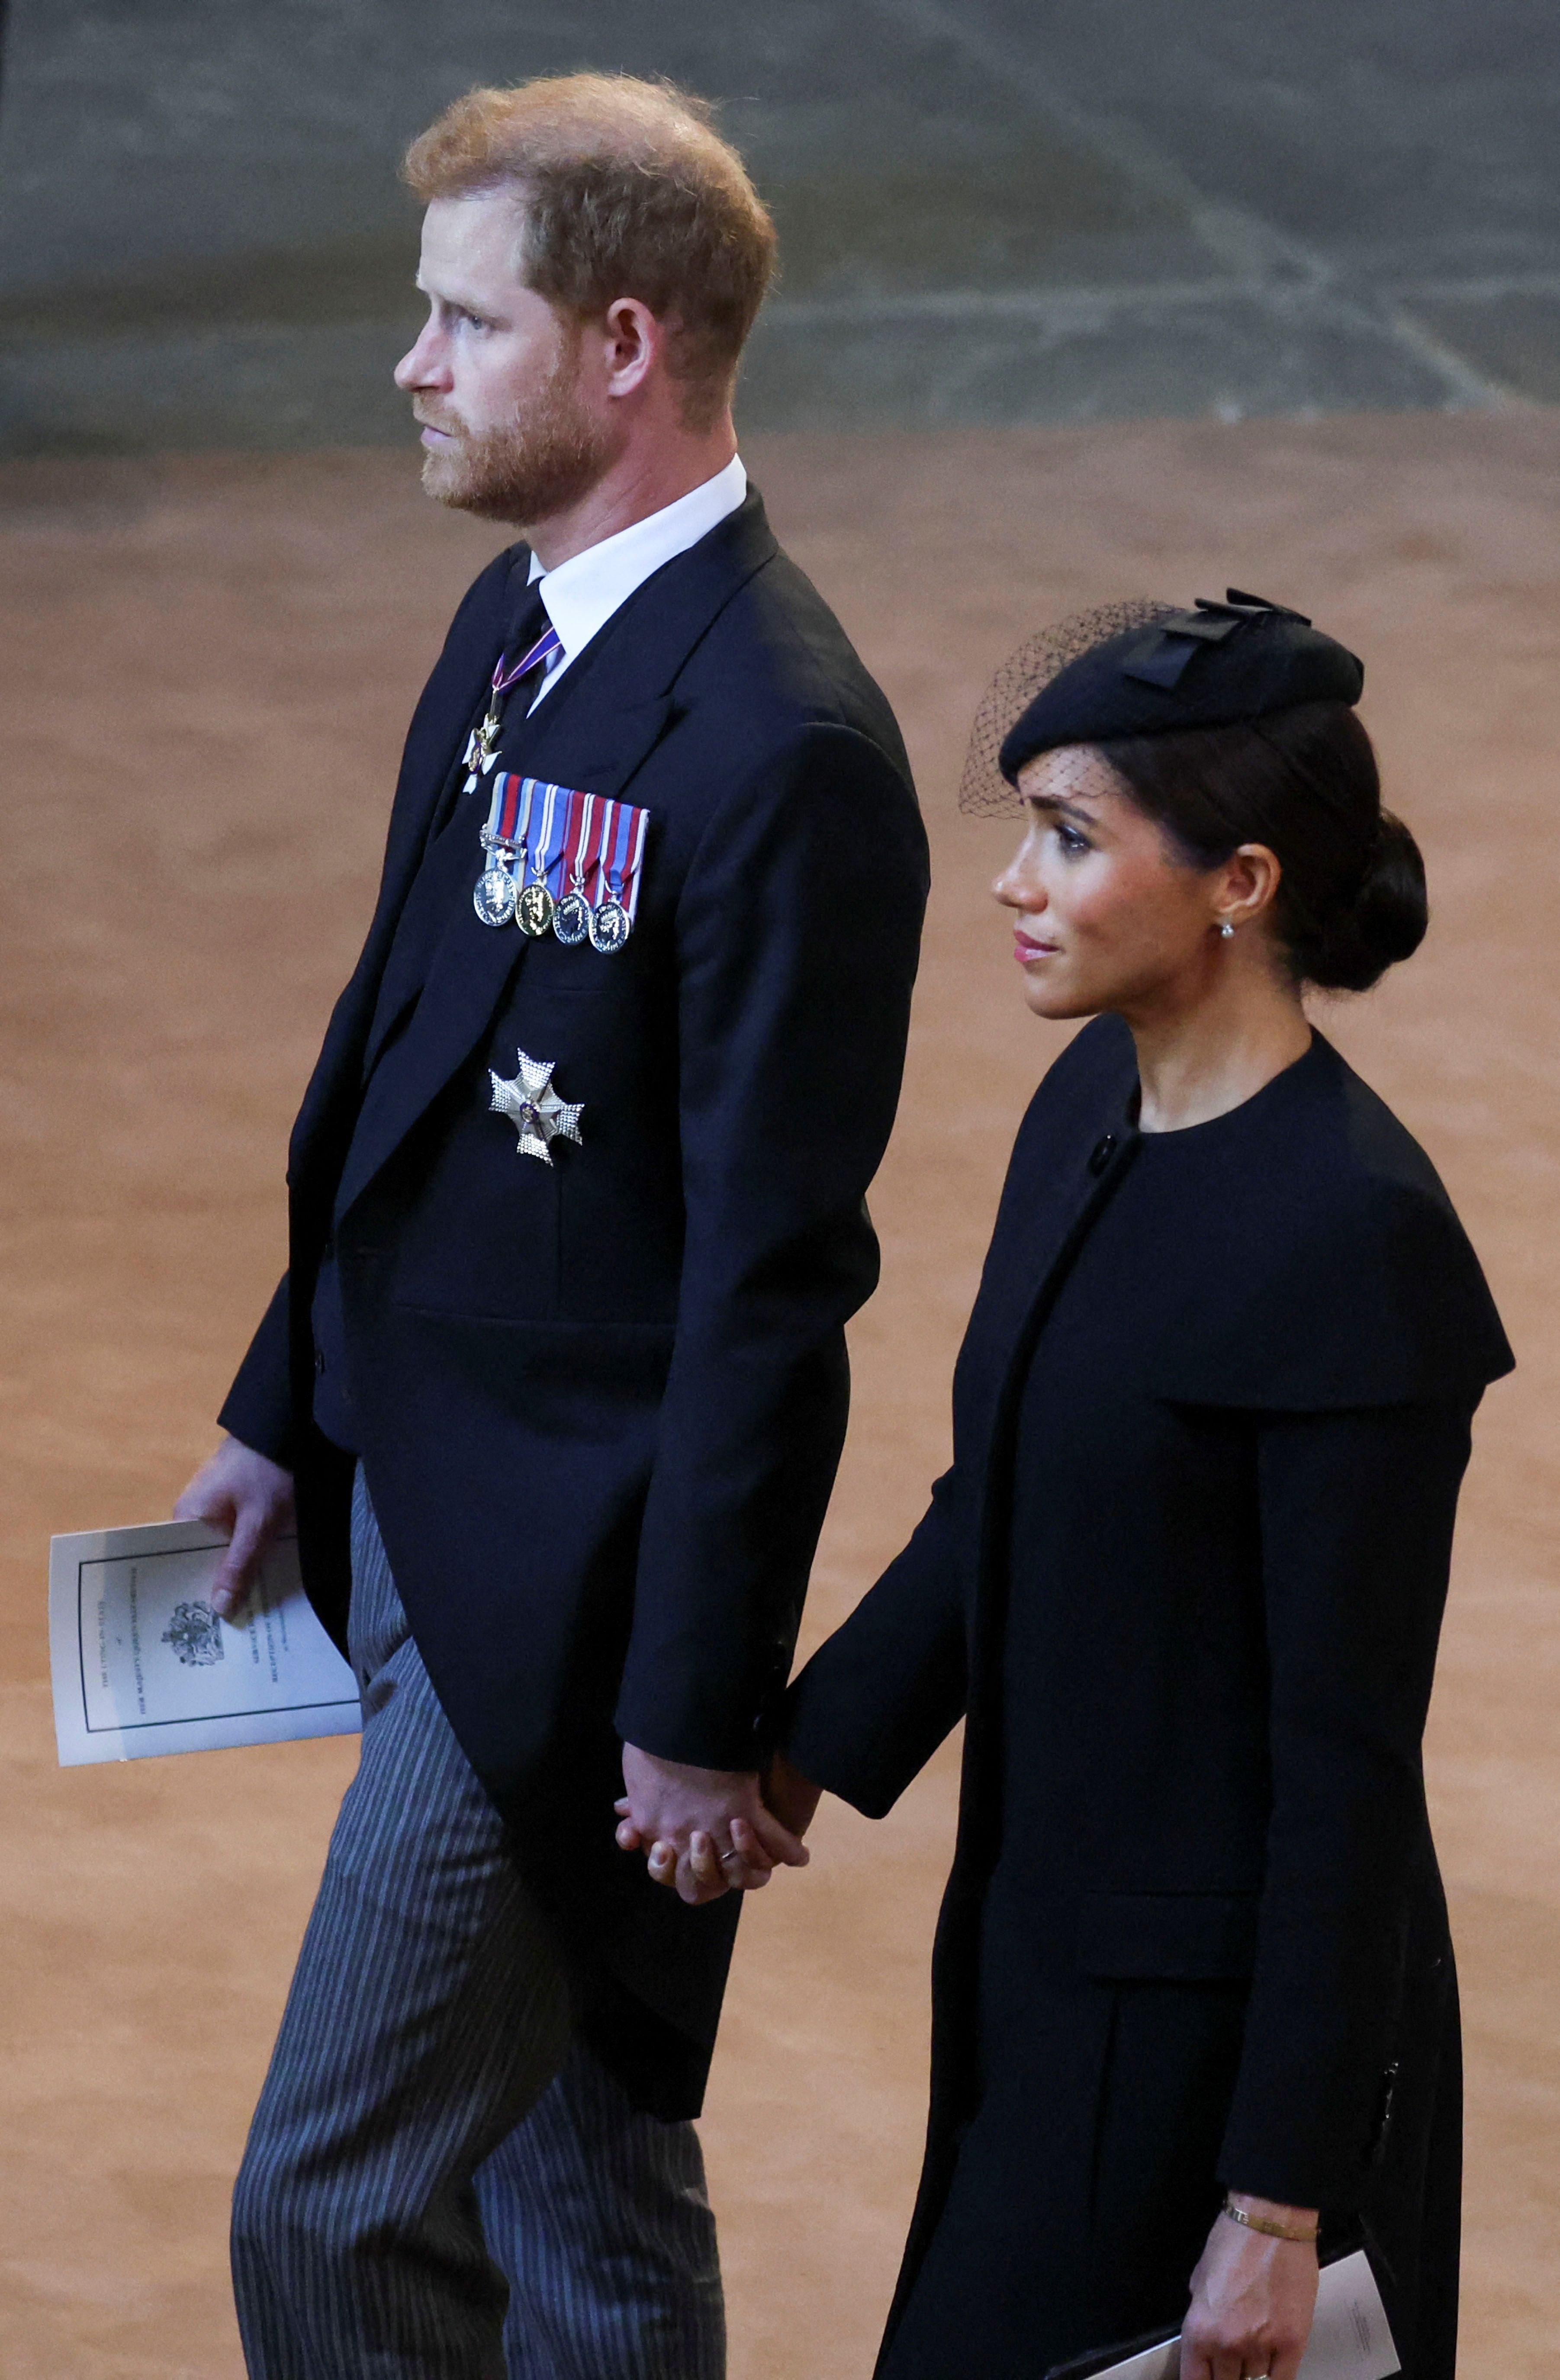 Prince Harry and Duchess Meghan leave after a service for the reception of Queen Elizabeth II's coffin at Westminster Hall, in the Palace of Westminster in London on September 14, 2022 | Source: Getty Images